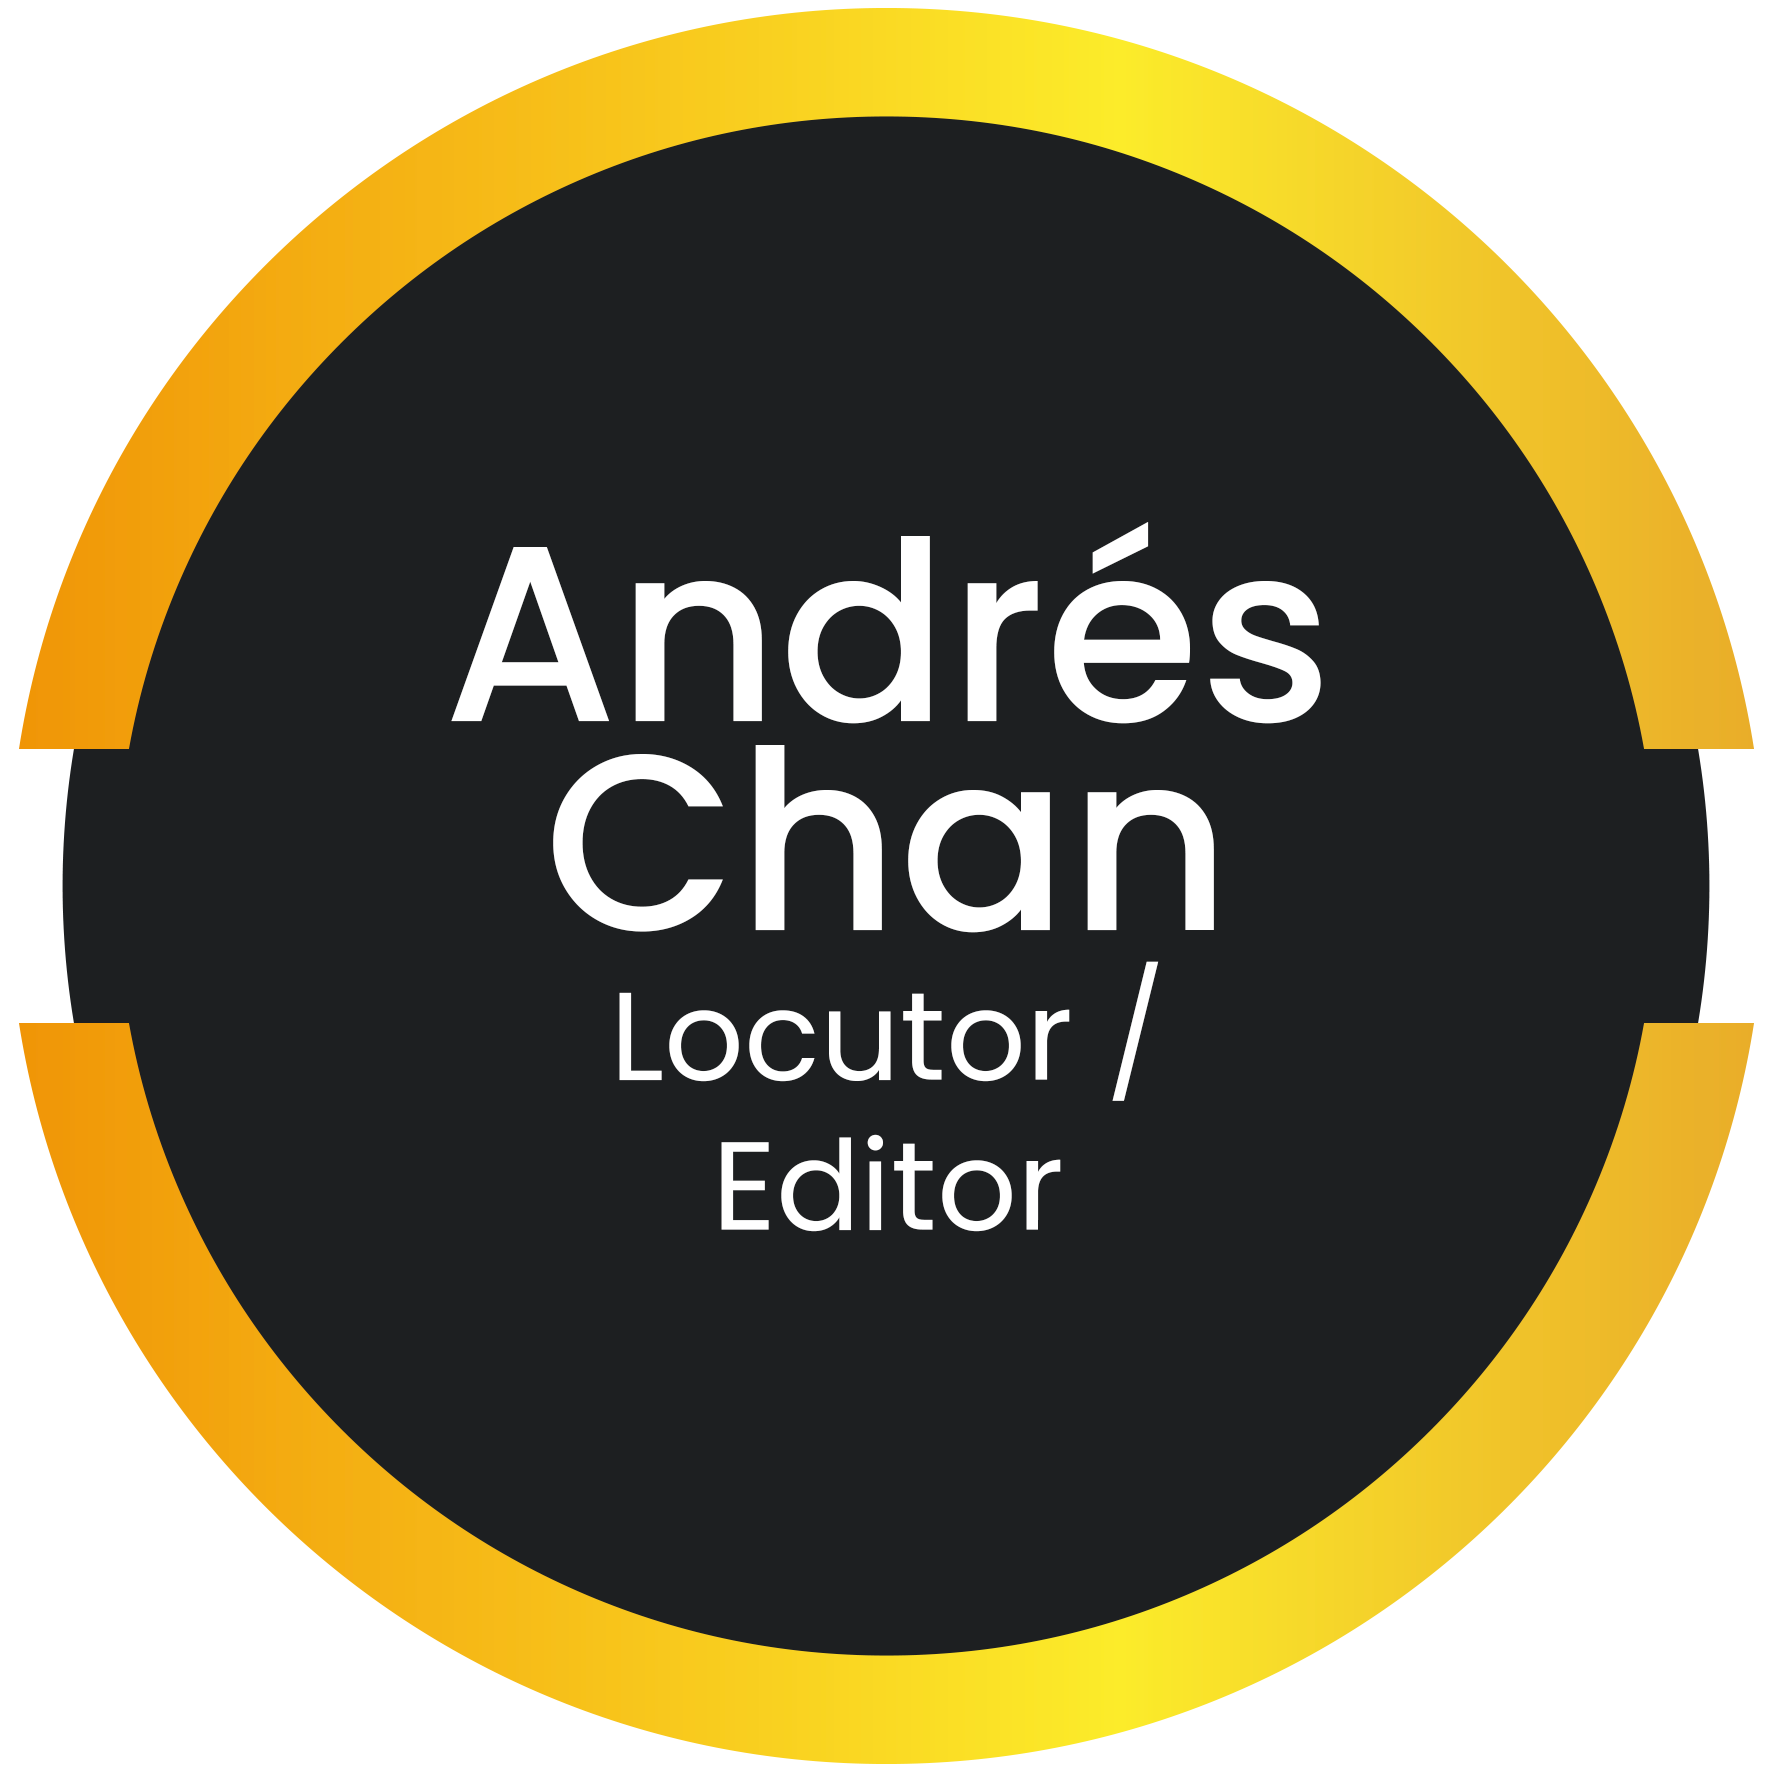 Andres Chan